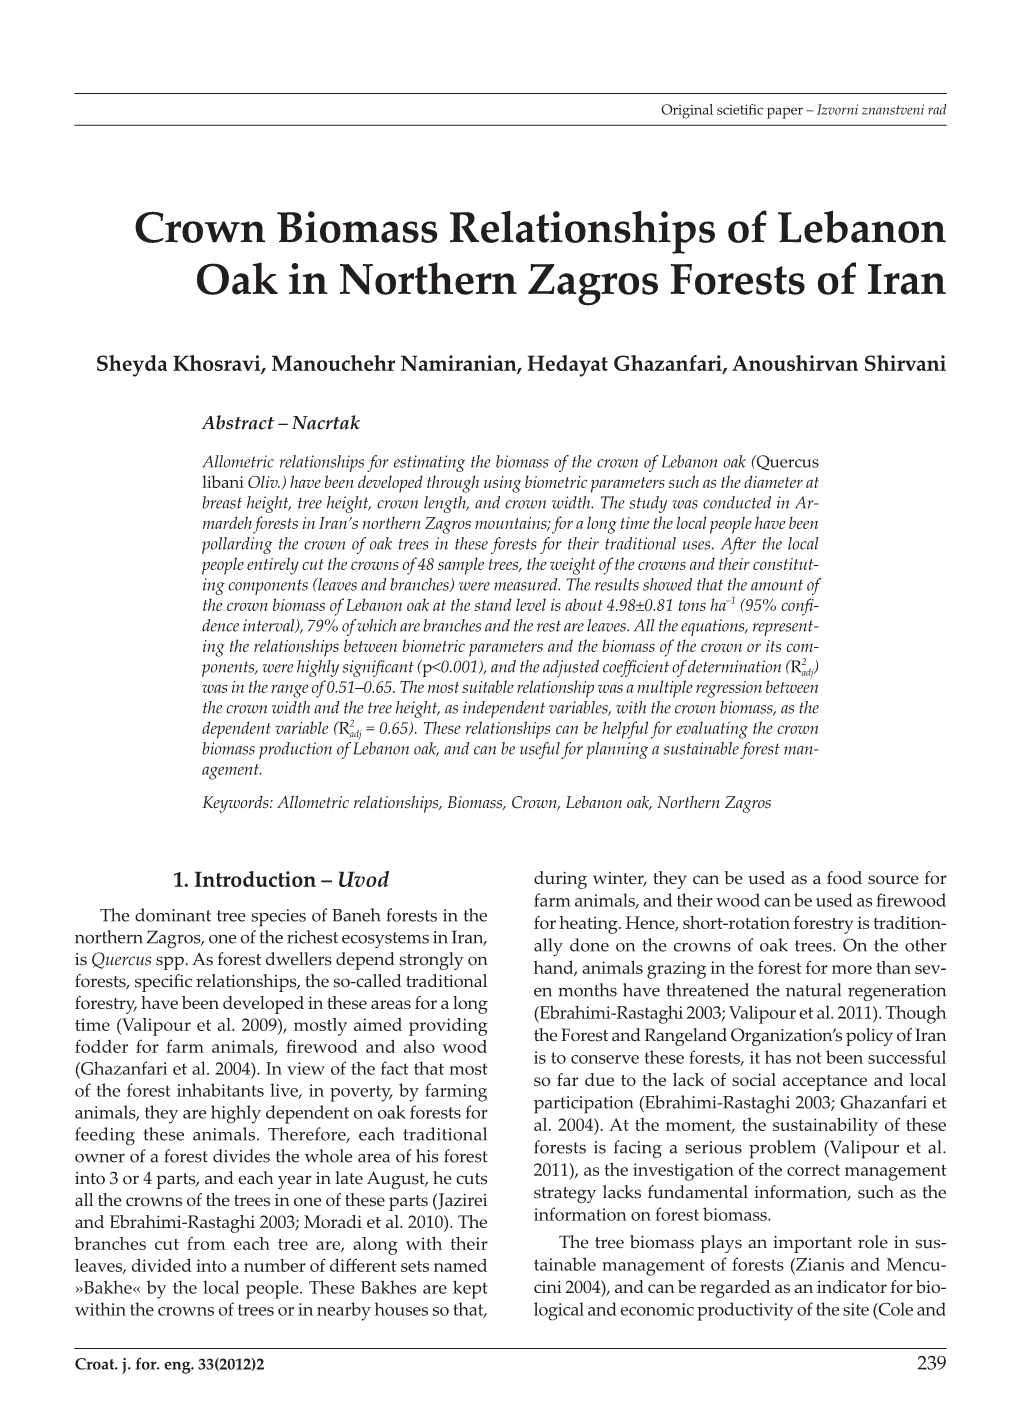 Crown Biomass Relationships of Lebanon Oak in Northern Zagros Forests of Iran